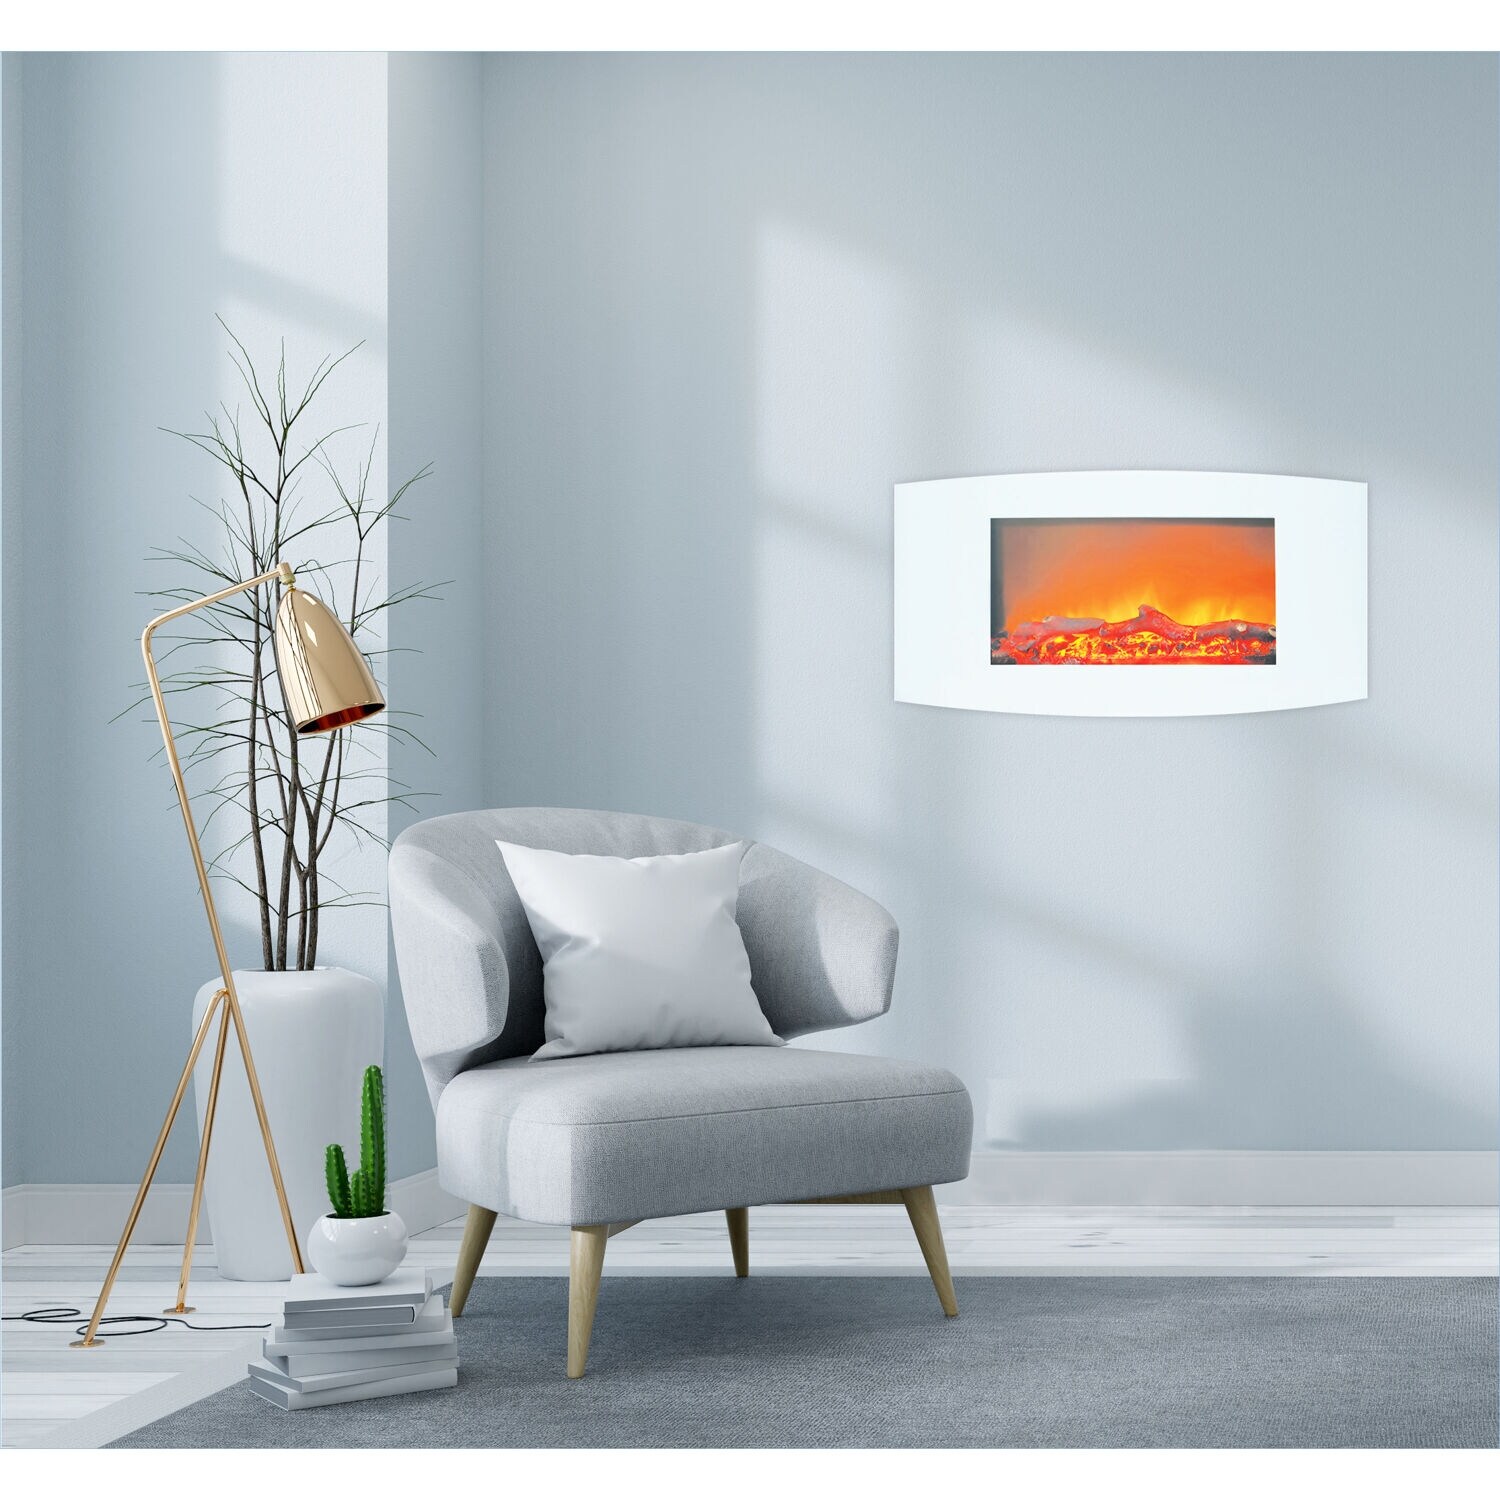 Hanover Fireside 35 In. Wall-Mount Electric Fireplace with White Curved Panel and Realistic Log Display